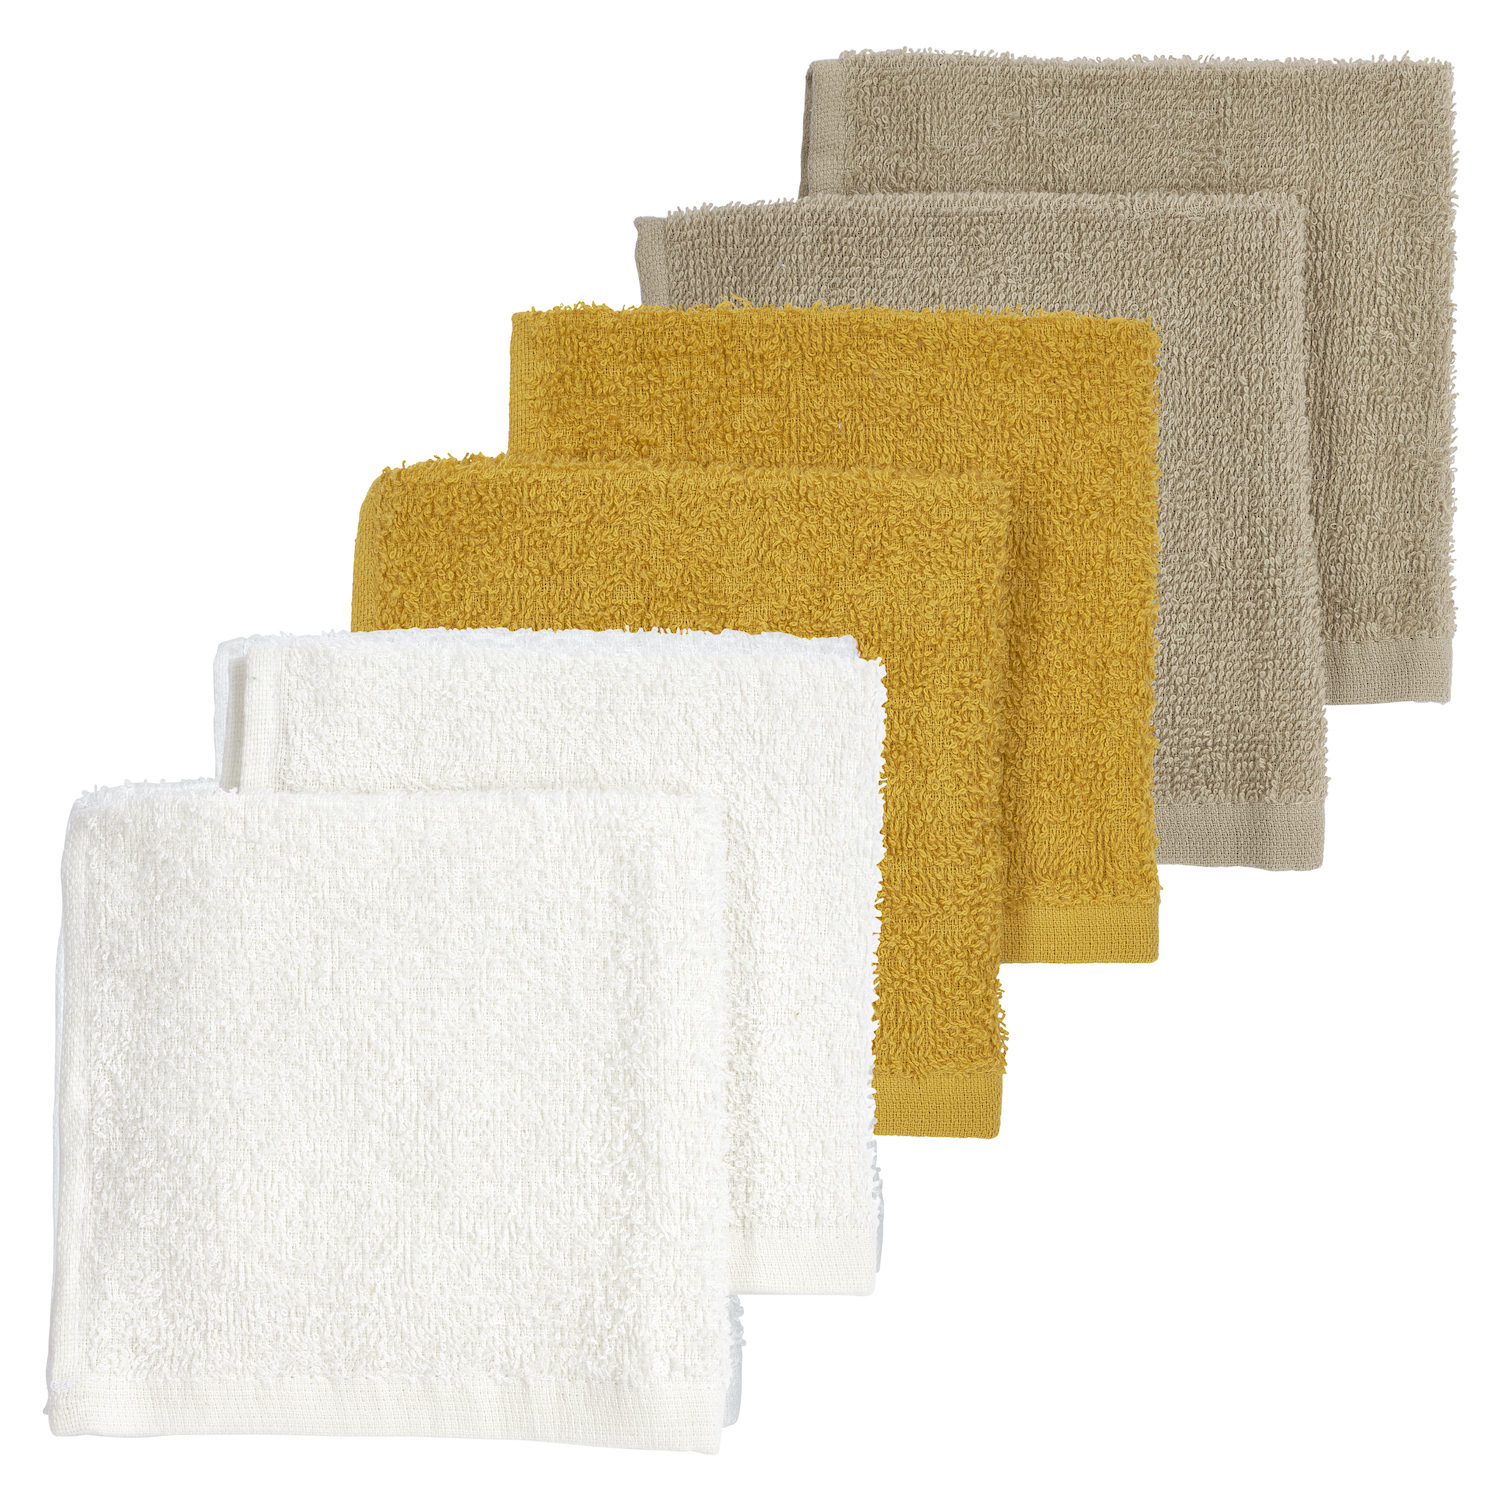 Basic Terry Face Cloths 6-pack  - Offwhite/Honey Gold/Taupe - 30x30cm